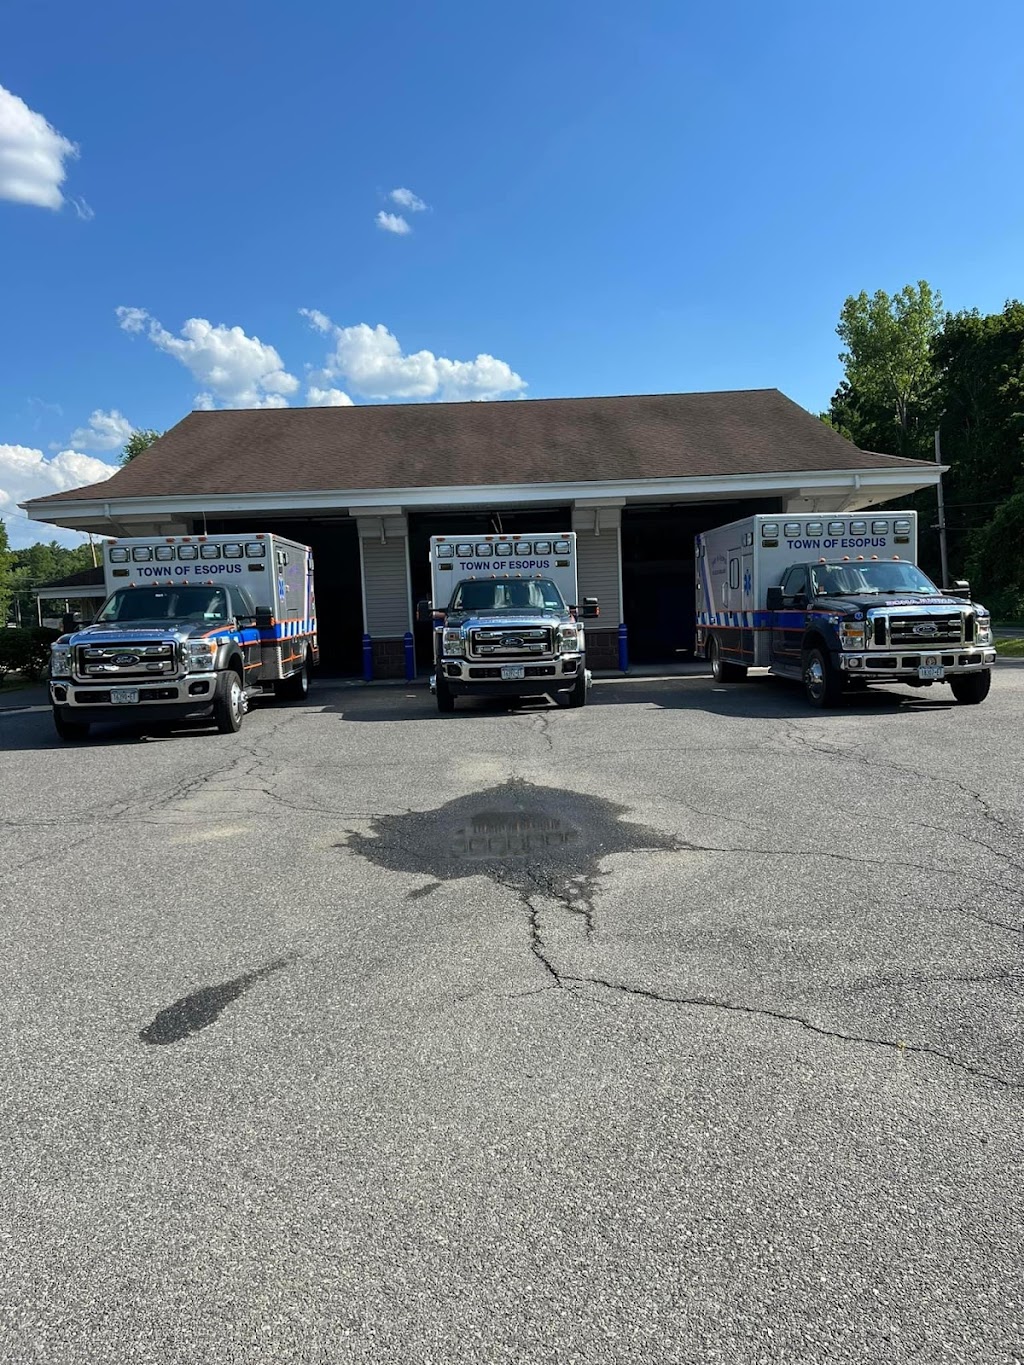 Town of Esopus Volunteer Ambulance Squad | 1 Cross St, Ulster Park, NY 12487 | Phone: (845) 338-1788